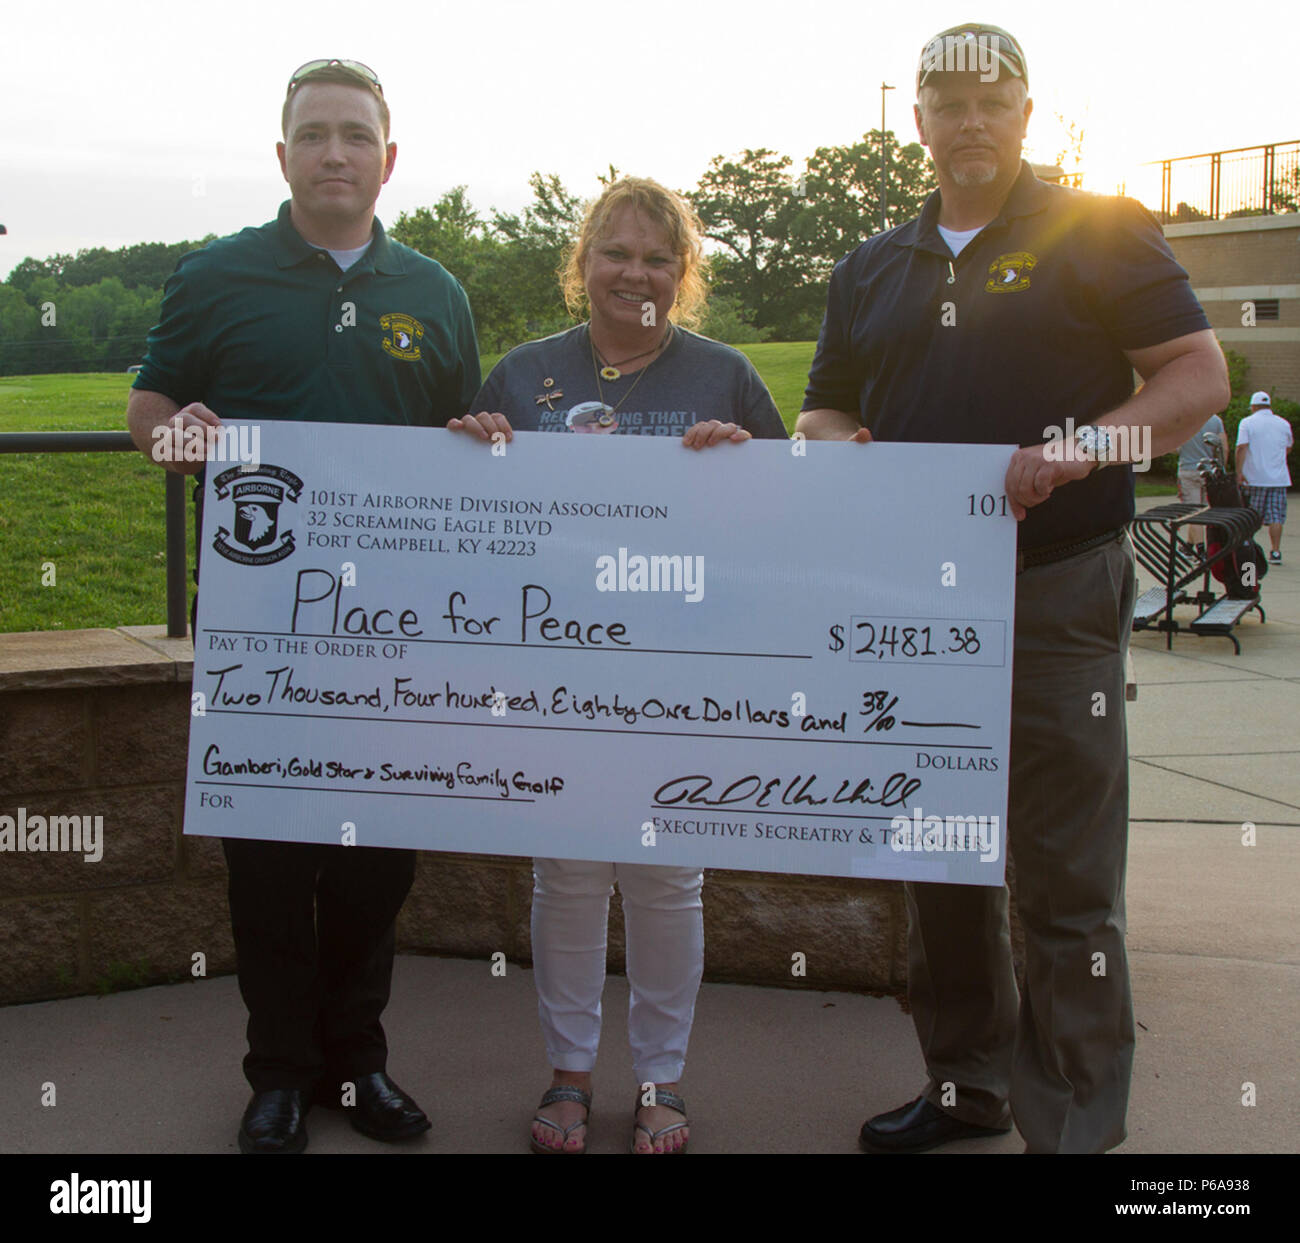 Sheila Patton, a Gold Star mother, receives a check for two thousand four hundred eighty one dollars and thirty eight cents to go towards her vision of a “Place for Peace” from the 101st Airborne Division Association at Cole Park, Fort Campbell, Ky., May 23, 2016.  A Place for Peace will include a pavilion, play area and walking trail for all Gold Star families to use near the Survivor Outreach Service facility. Stock Photo